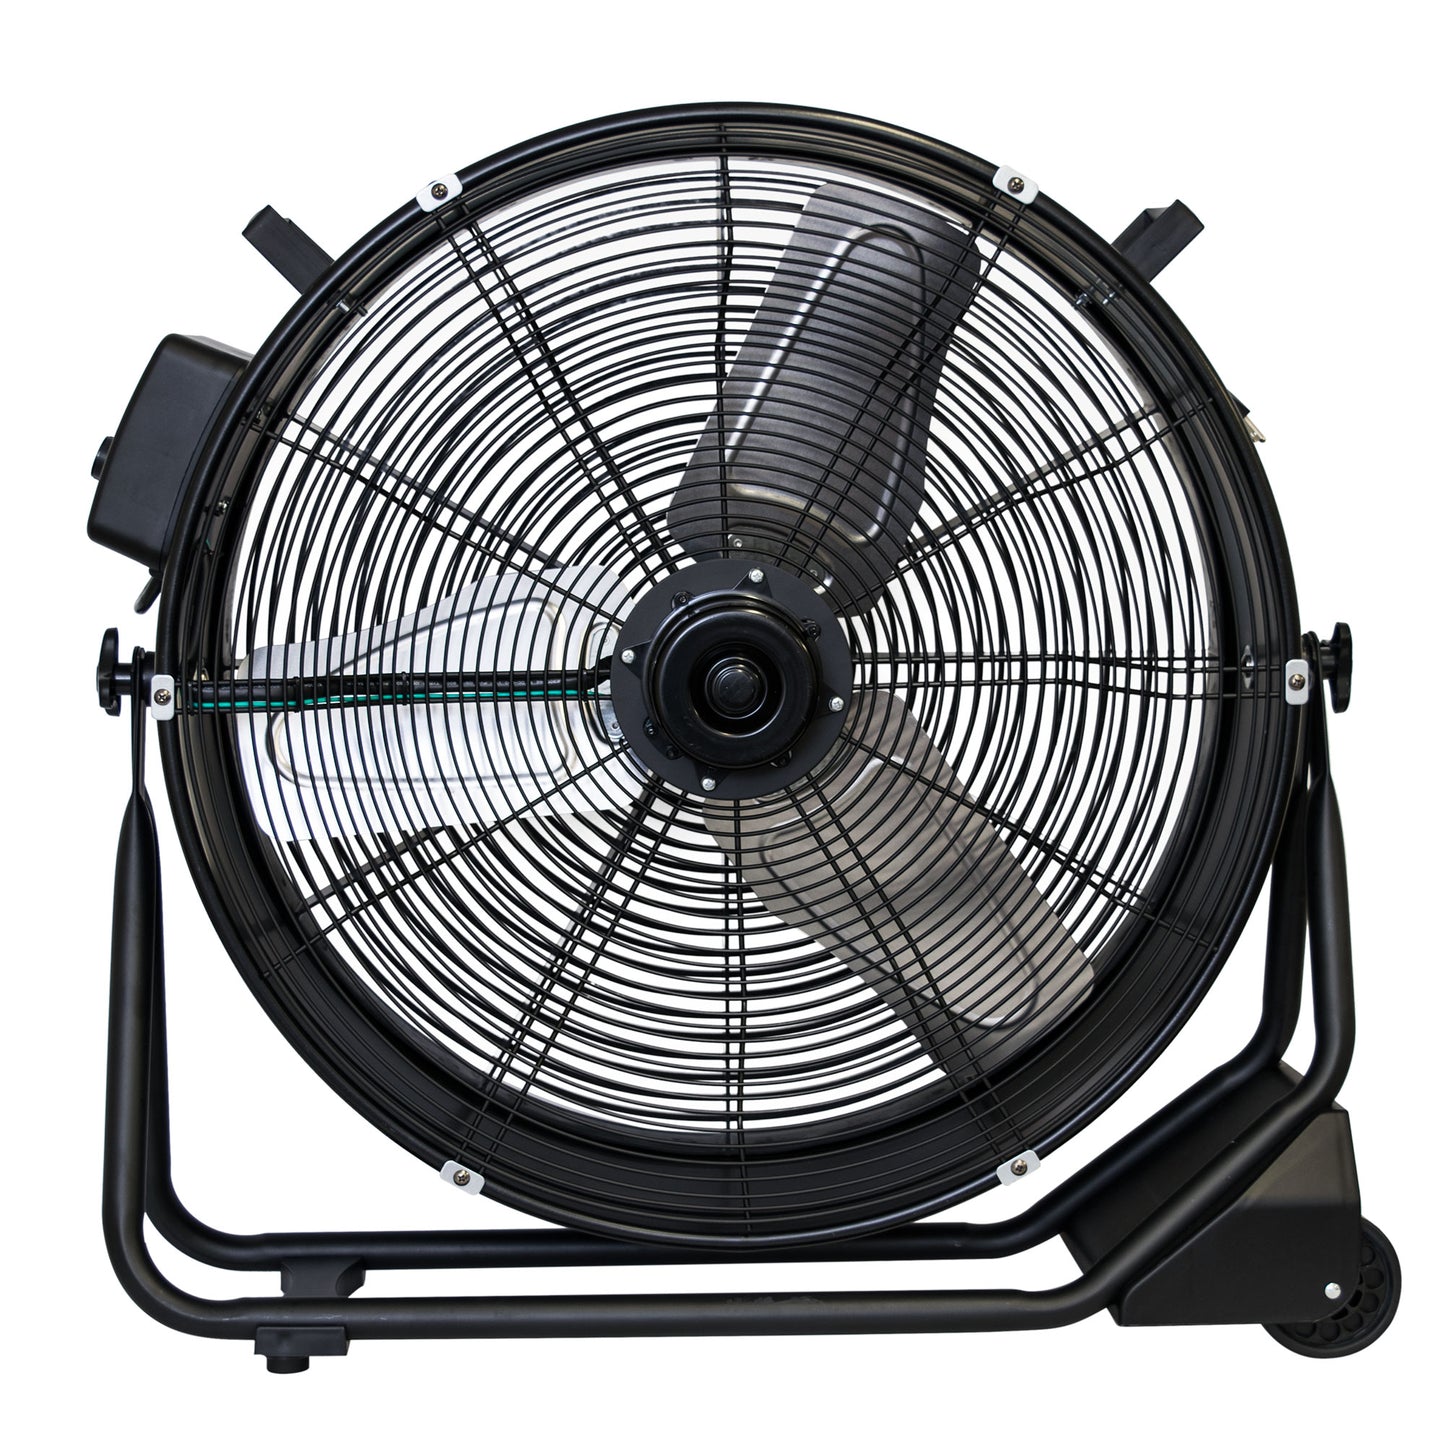 XPOWER FD-630D Brushless DC High Velocity 24” Drum Fan